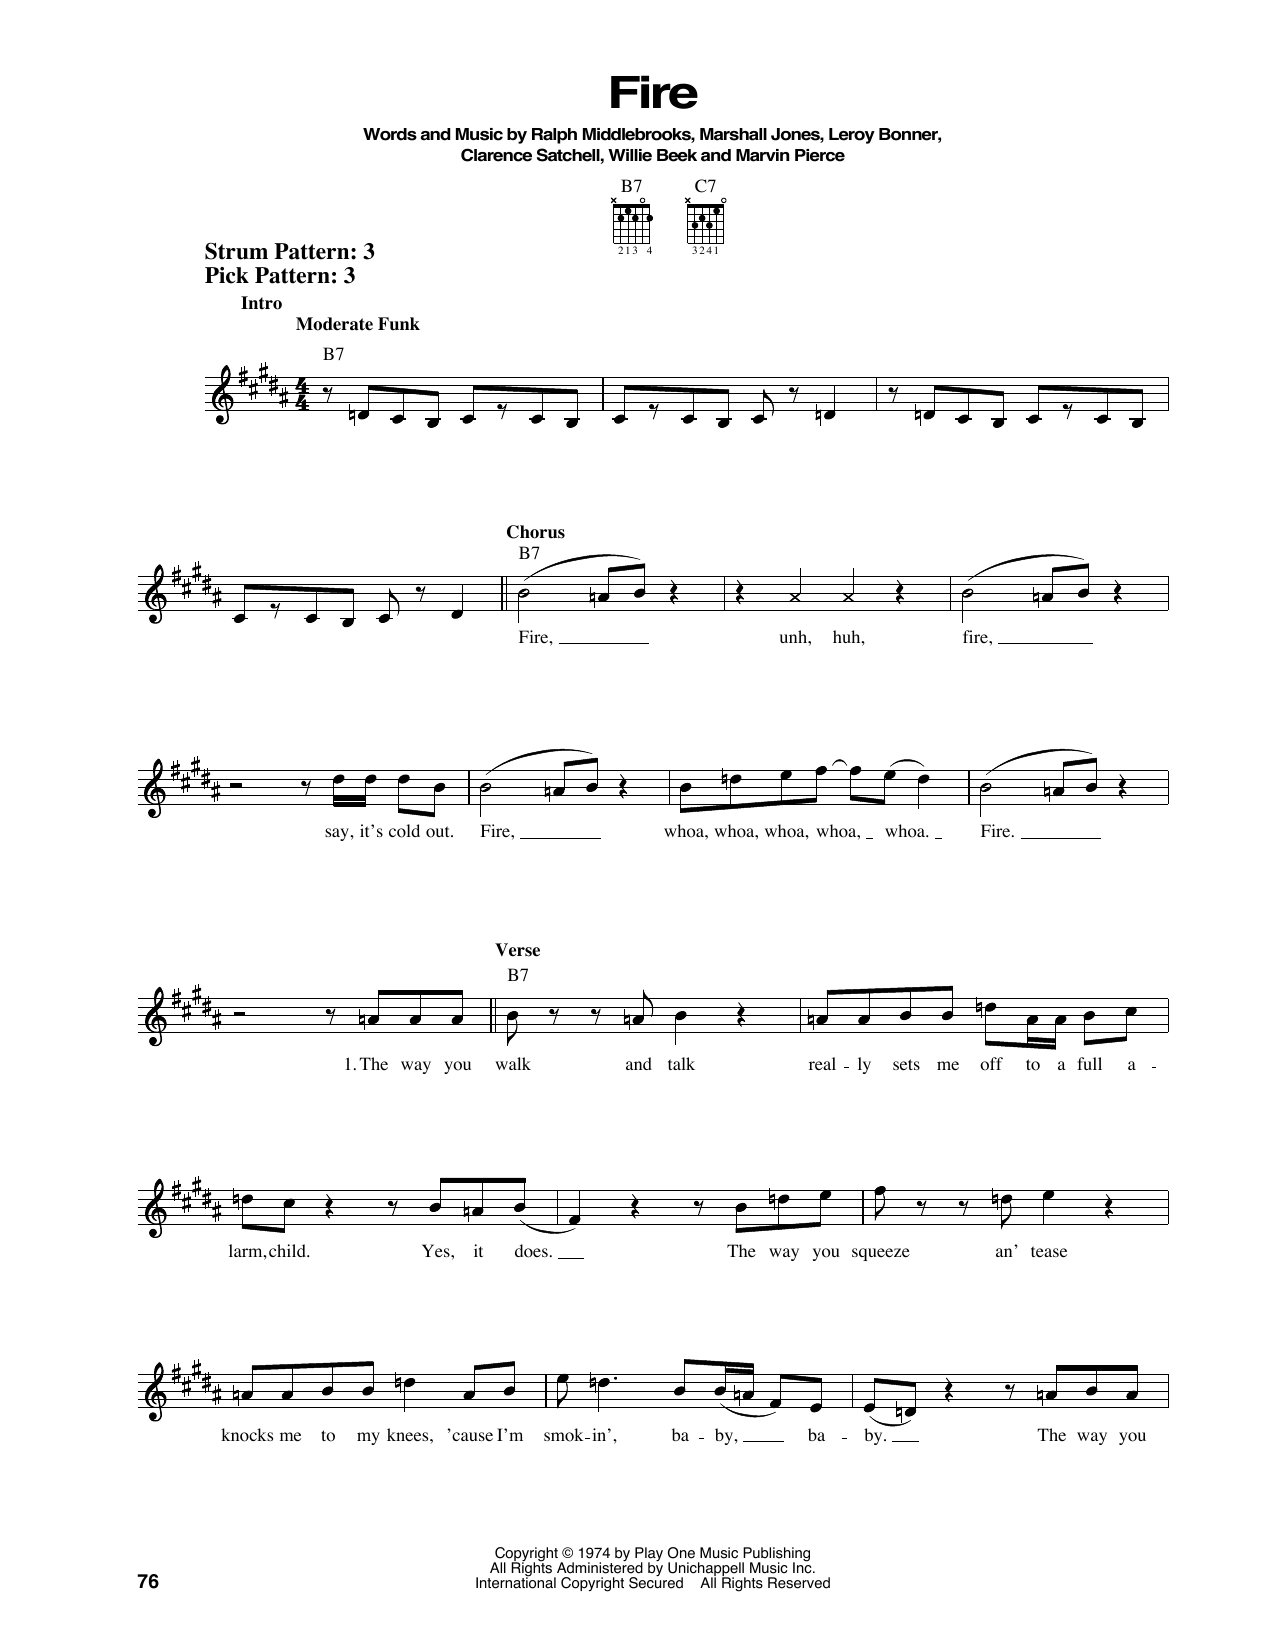 Download Ohio Players Fire Sheet Music